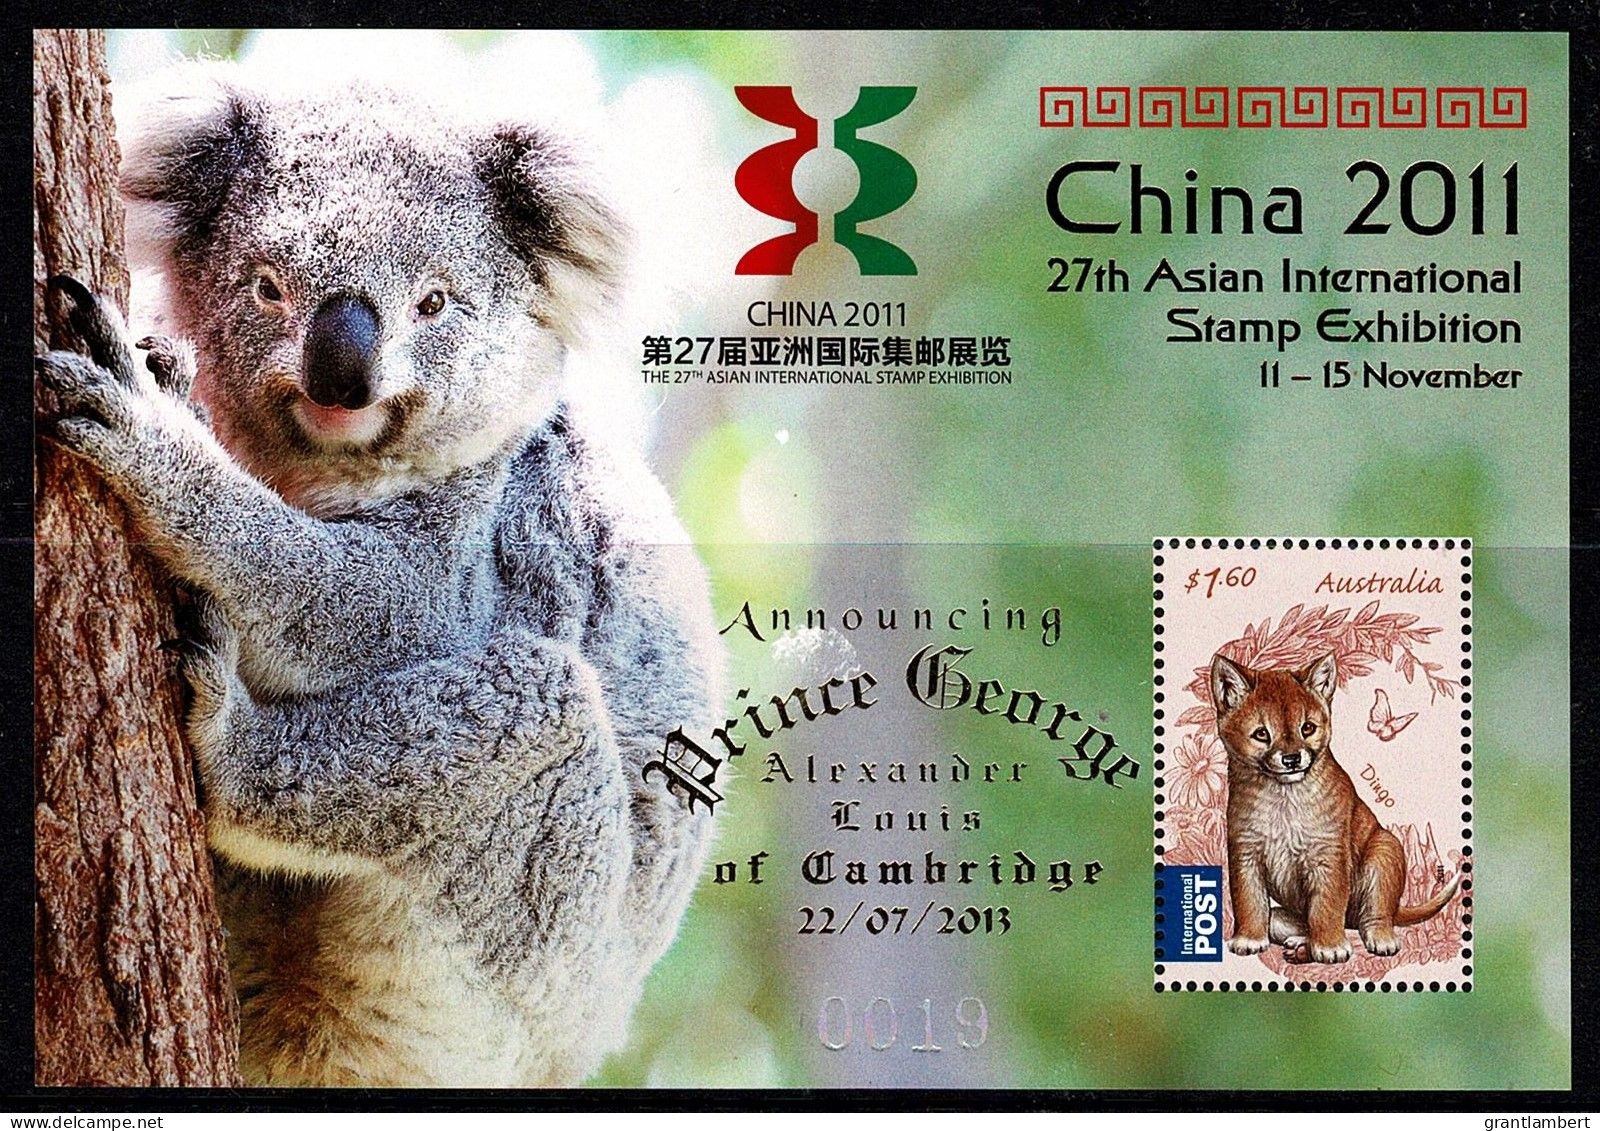 Australia 2011 China 2011 Exhibition Minisheet OP Prince George Of Cambridge 2013 MNH - Mint Stamps